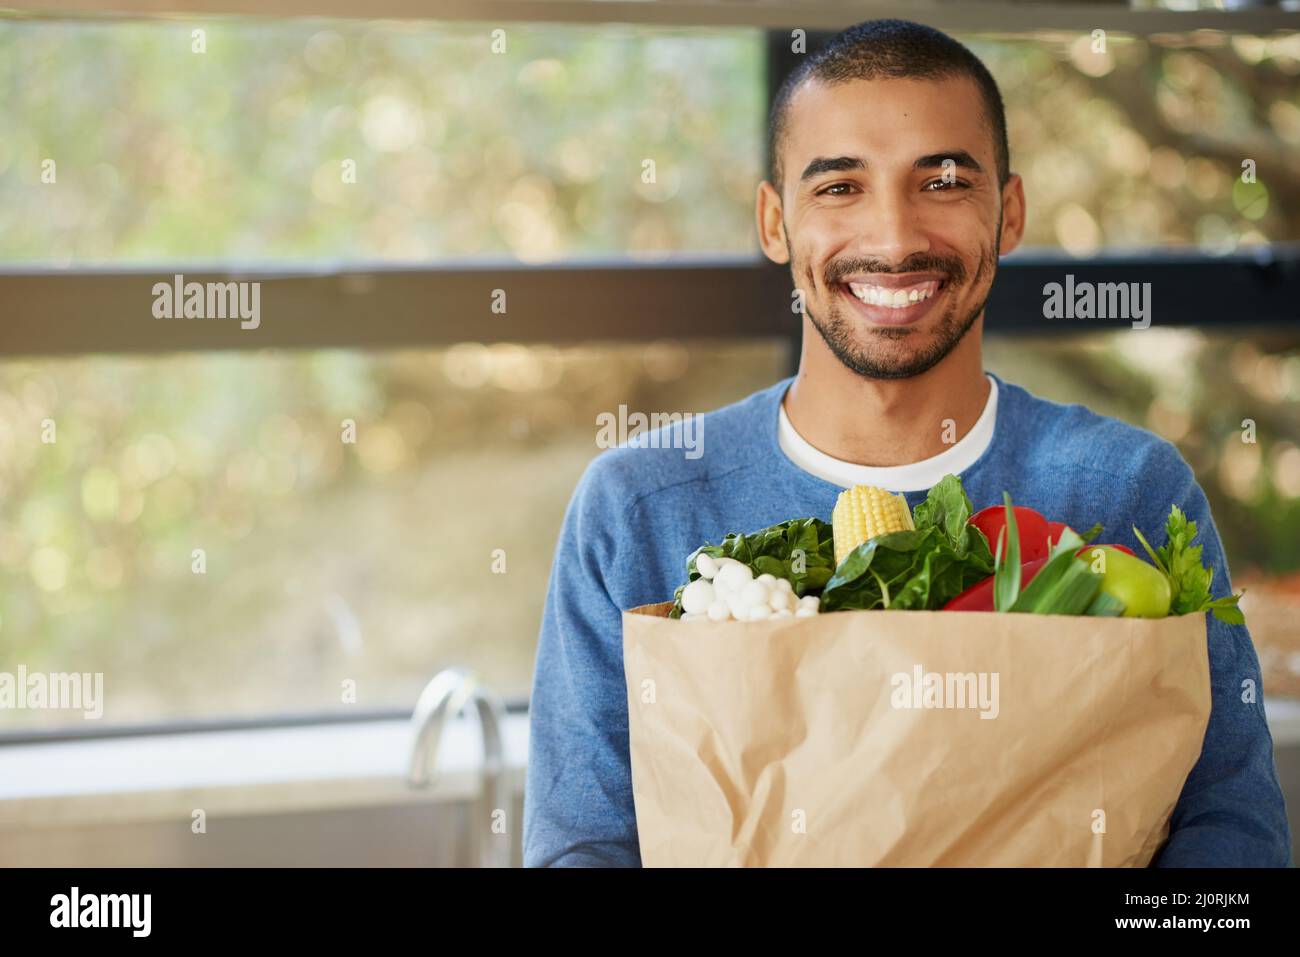 Healthy food motivates me to be my best. Portrait of a happy young man holding a bag full of healthy vegetables at homee. Stock Photo